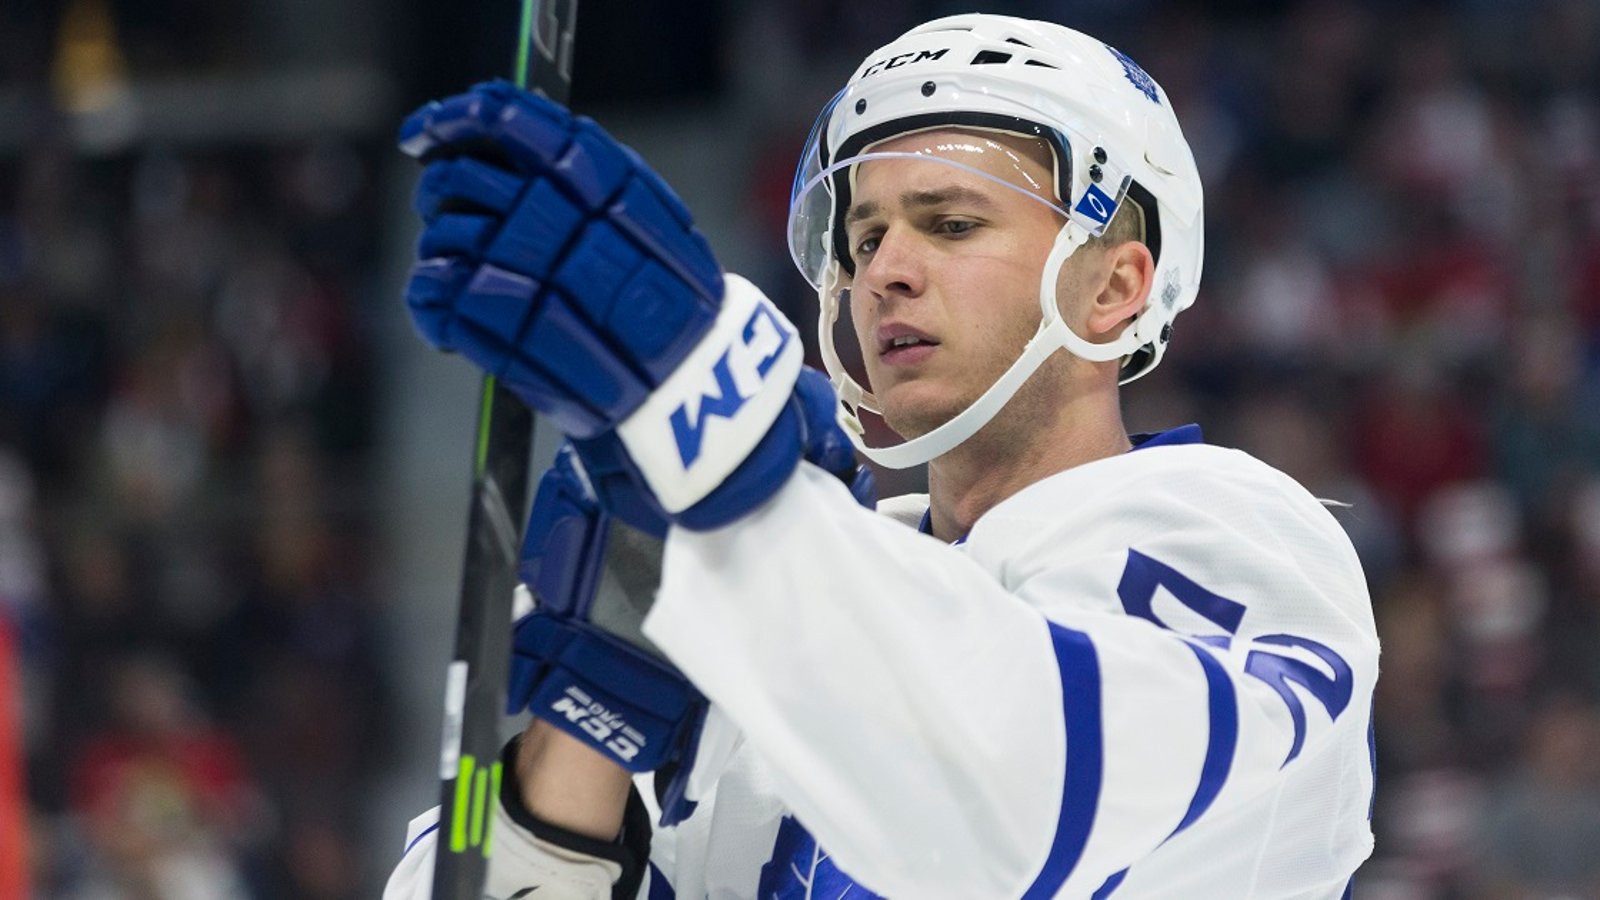 Leafs defenseman headed to waivers after big trade.